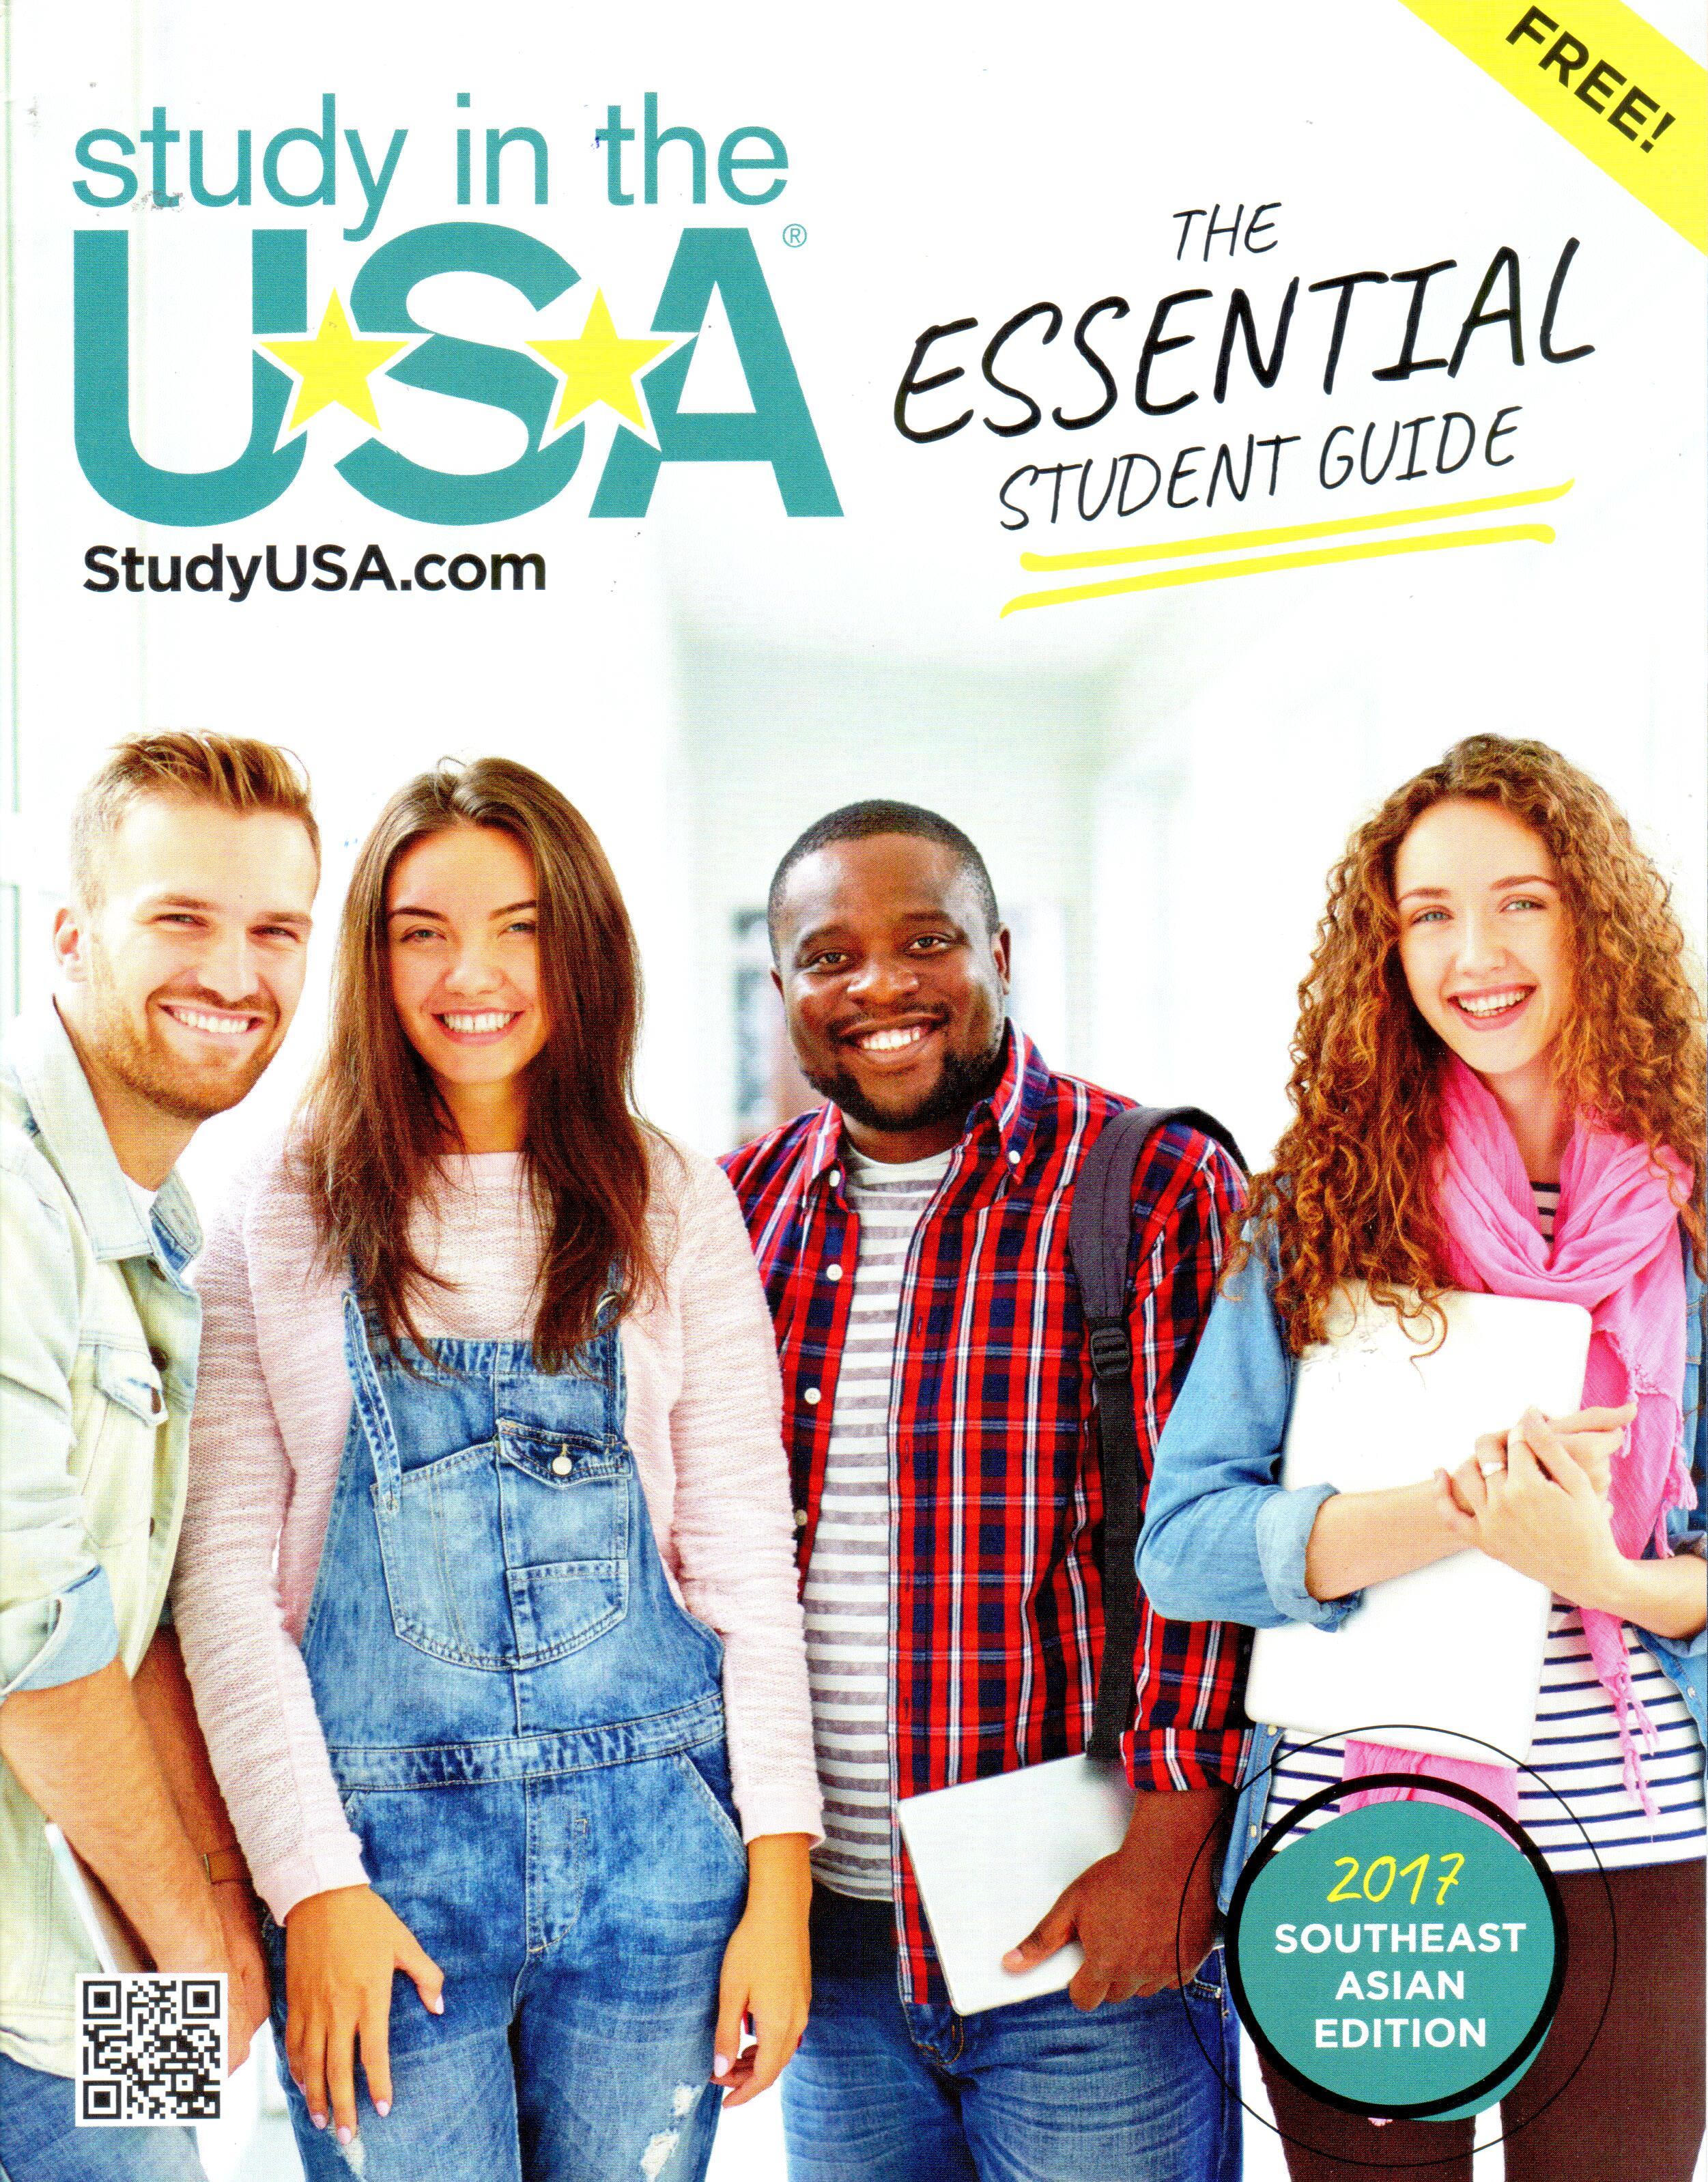 Study in the USA: Southeast Asian Edition 2017